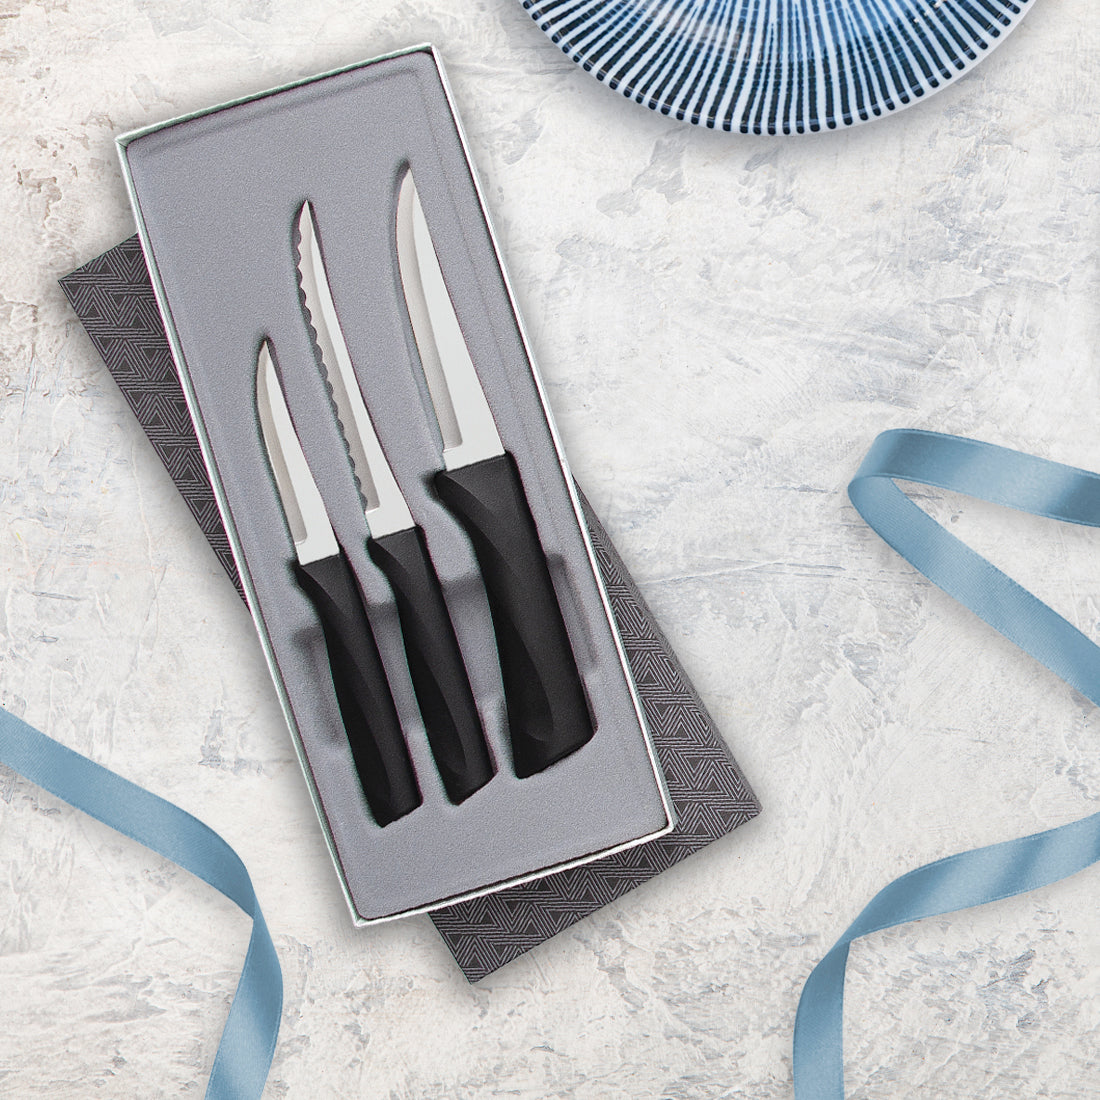 Rada Cutlery Meal Prep 4-Piece Paring Knife Gift Set – Stainless